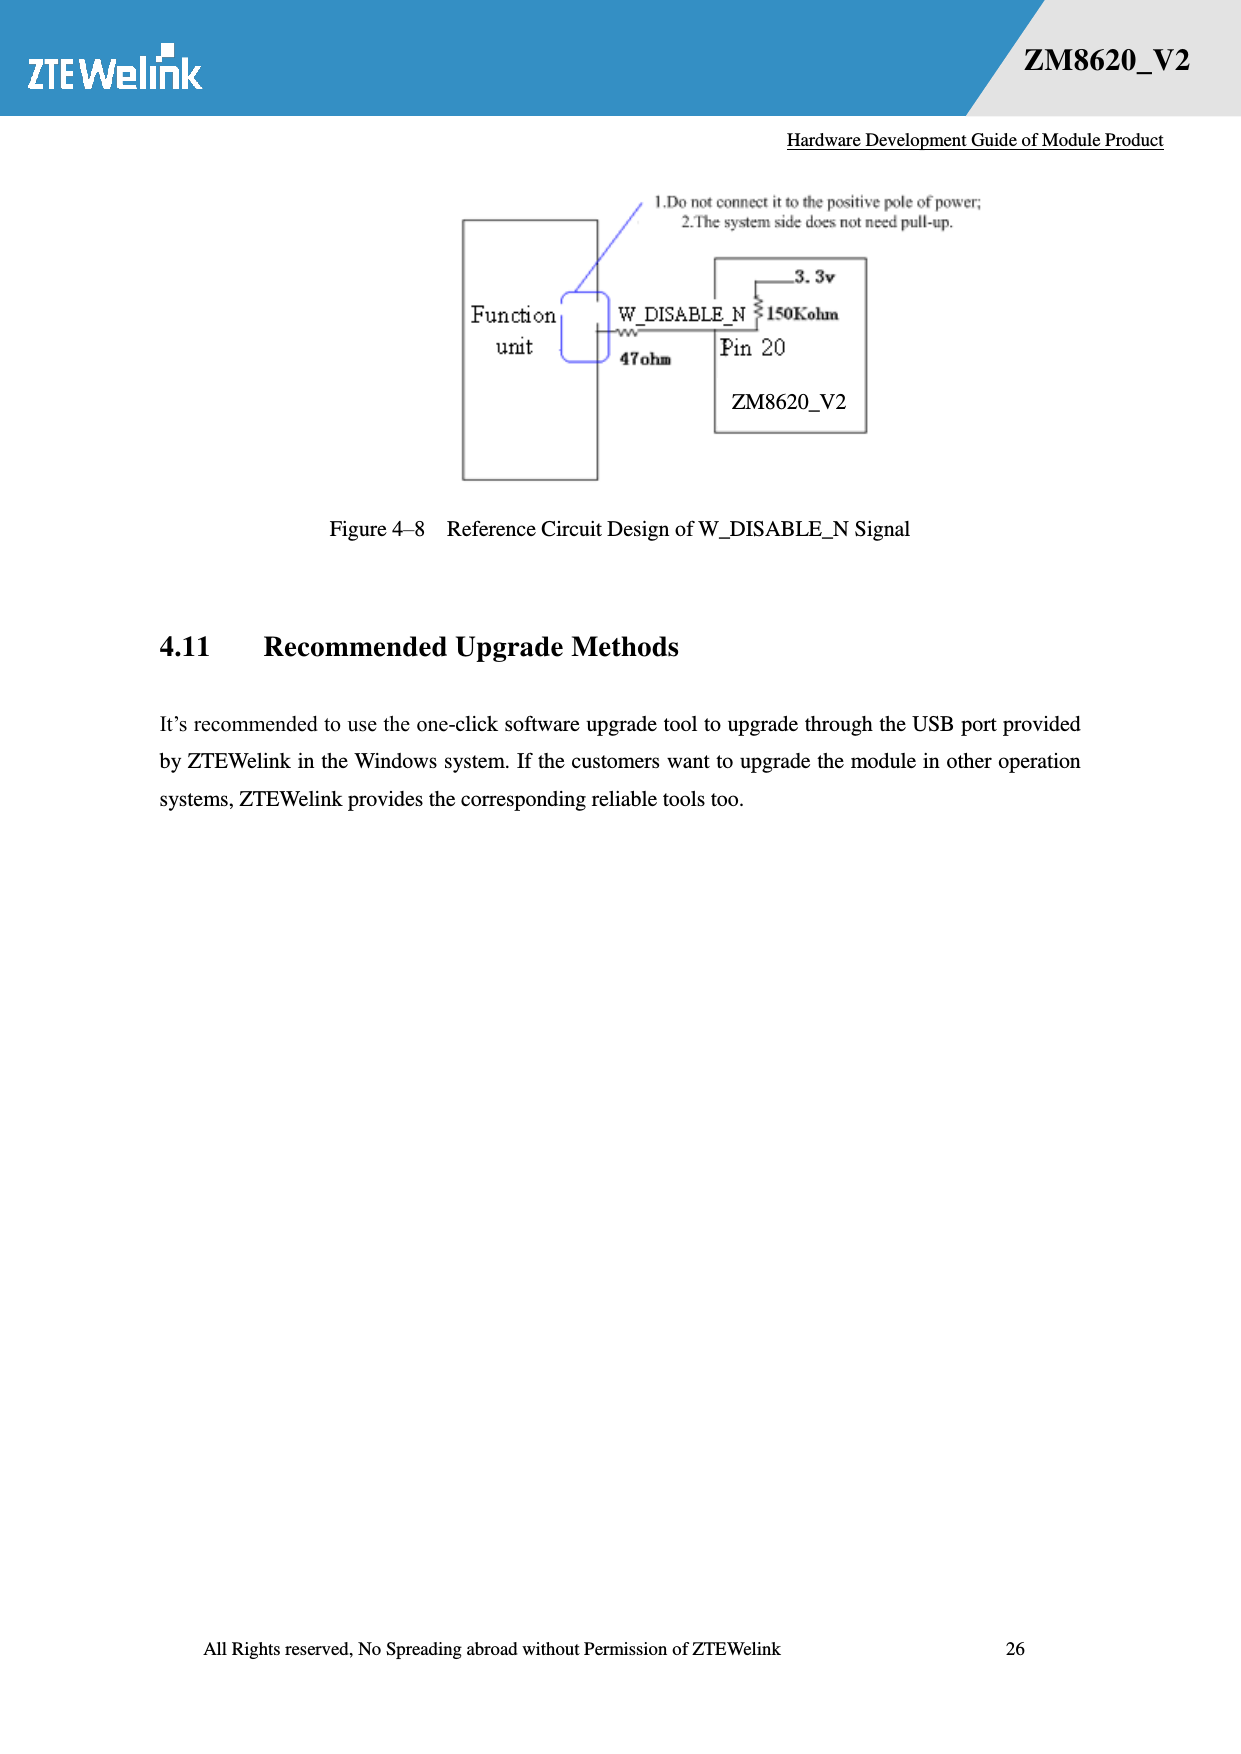   Hardware Development Guide of Module Product  All Rights reserved, No Spreading abroad without Permission of ZTEWelink              26 错误！未找到用源。    ZM8620_V2  Figure 4–8  Reference Circuit Design of W_DISABLE_N Signal  4.11 Recommended Upgrade Methods It‘s recommended to use the one-click software upgrade tool to upgrade through the USB port provided by ZTEWelink in the Windows system. If the customers want to upgrade the module in other operation systems, ZTEWelink provides the corresponding reliable tools too.    ZM8620_V2 